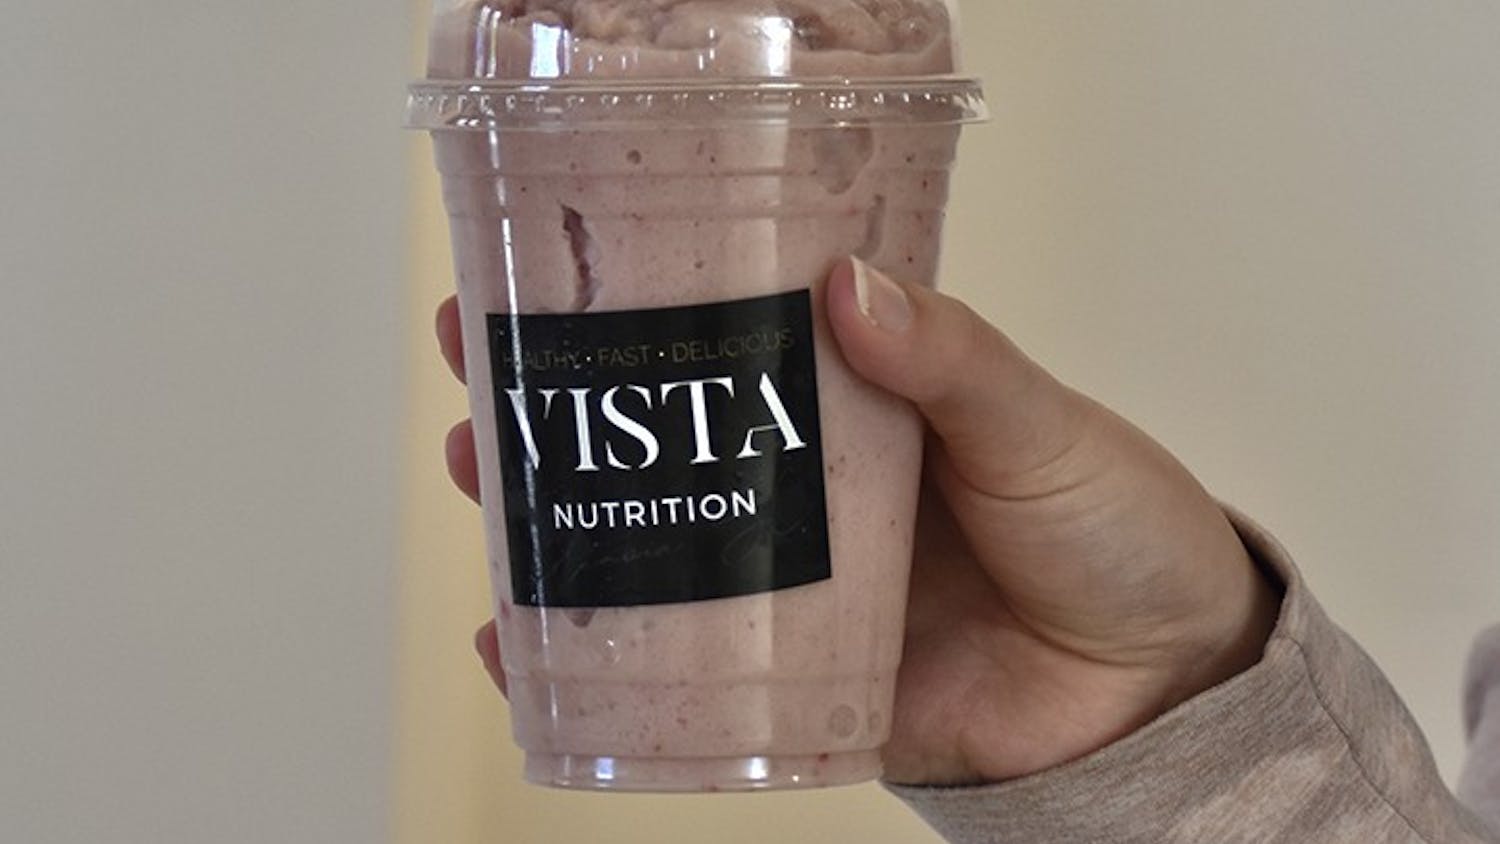 A strawberry milkshake is one of the many items offered by Vista Nutrition on Gervais Street.